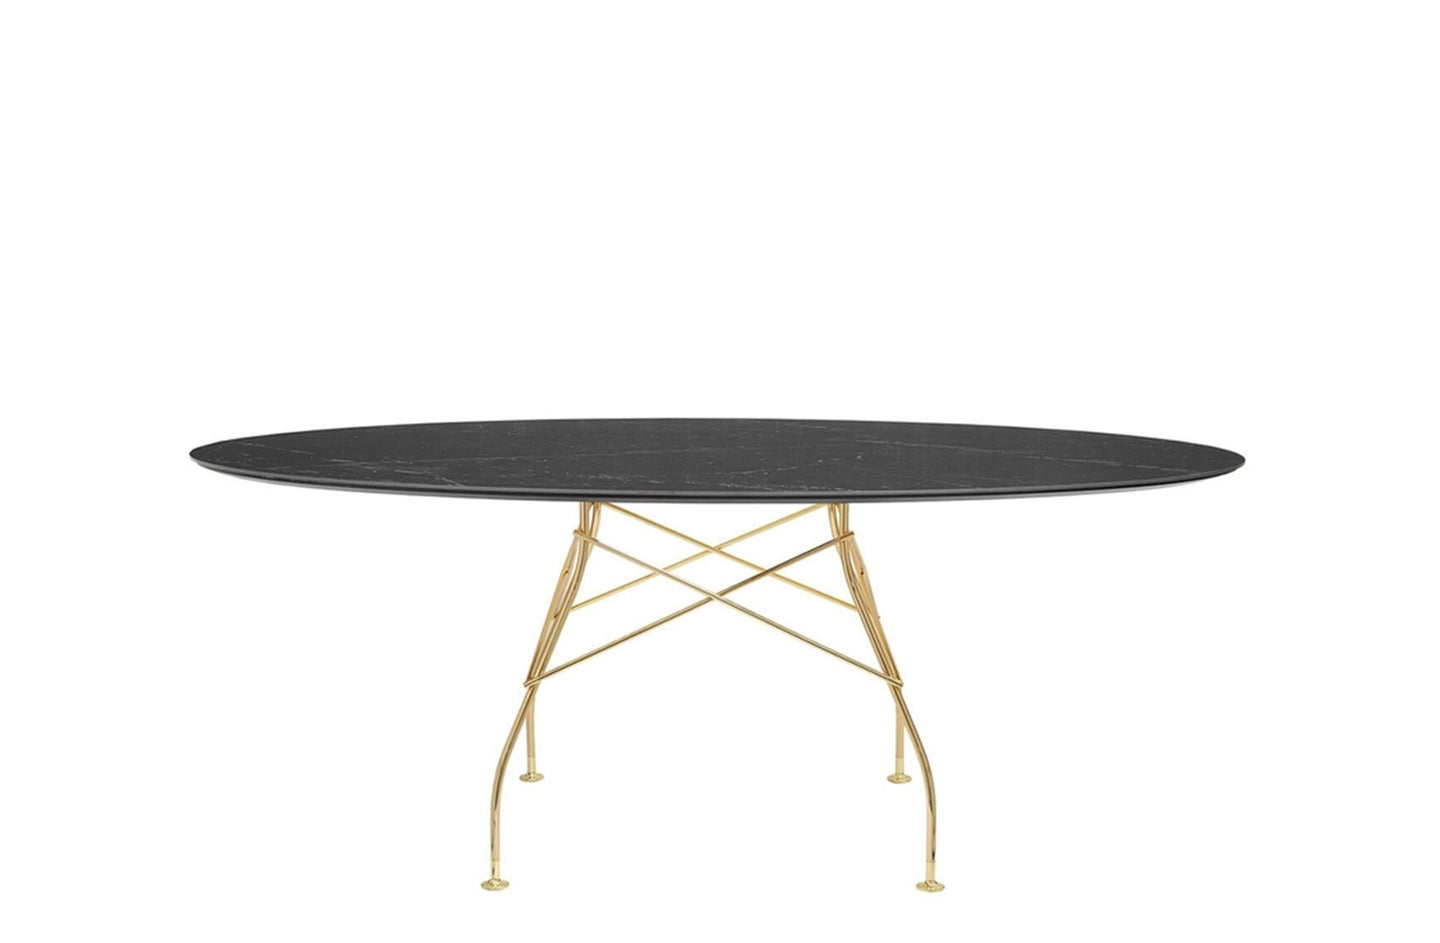 Glossy Oval Table - Stoneware
